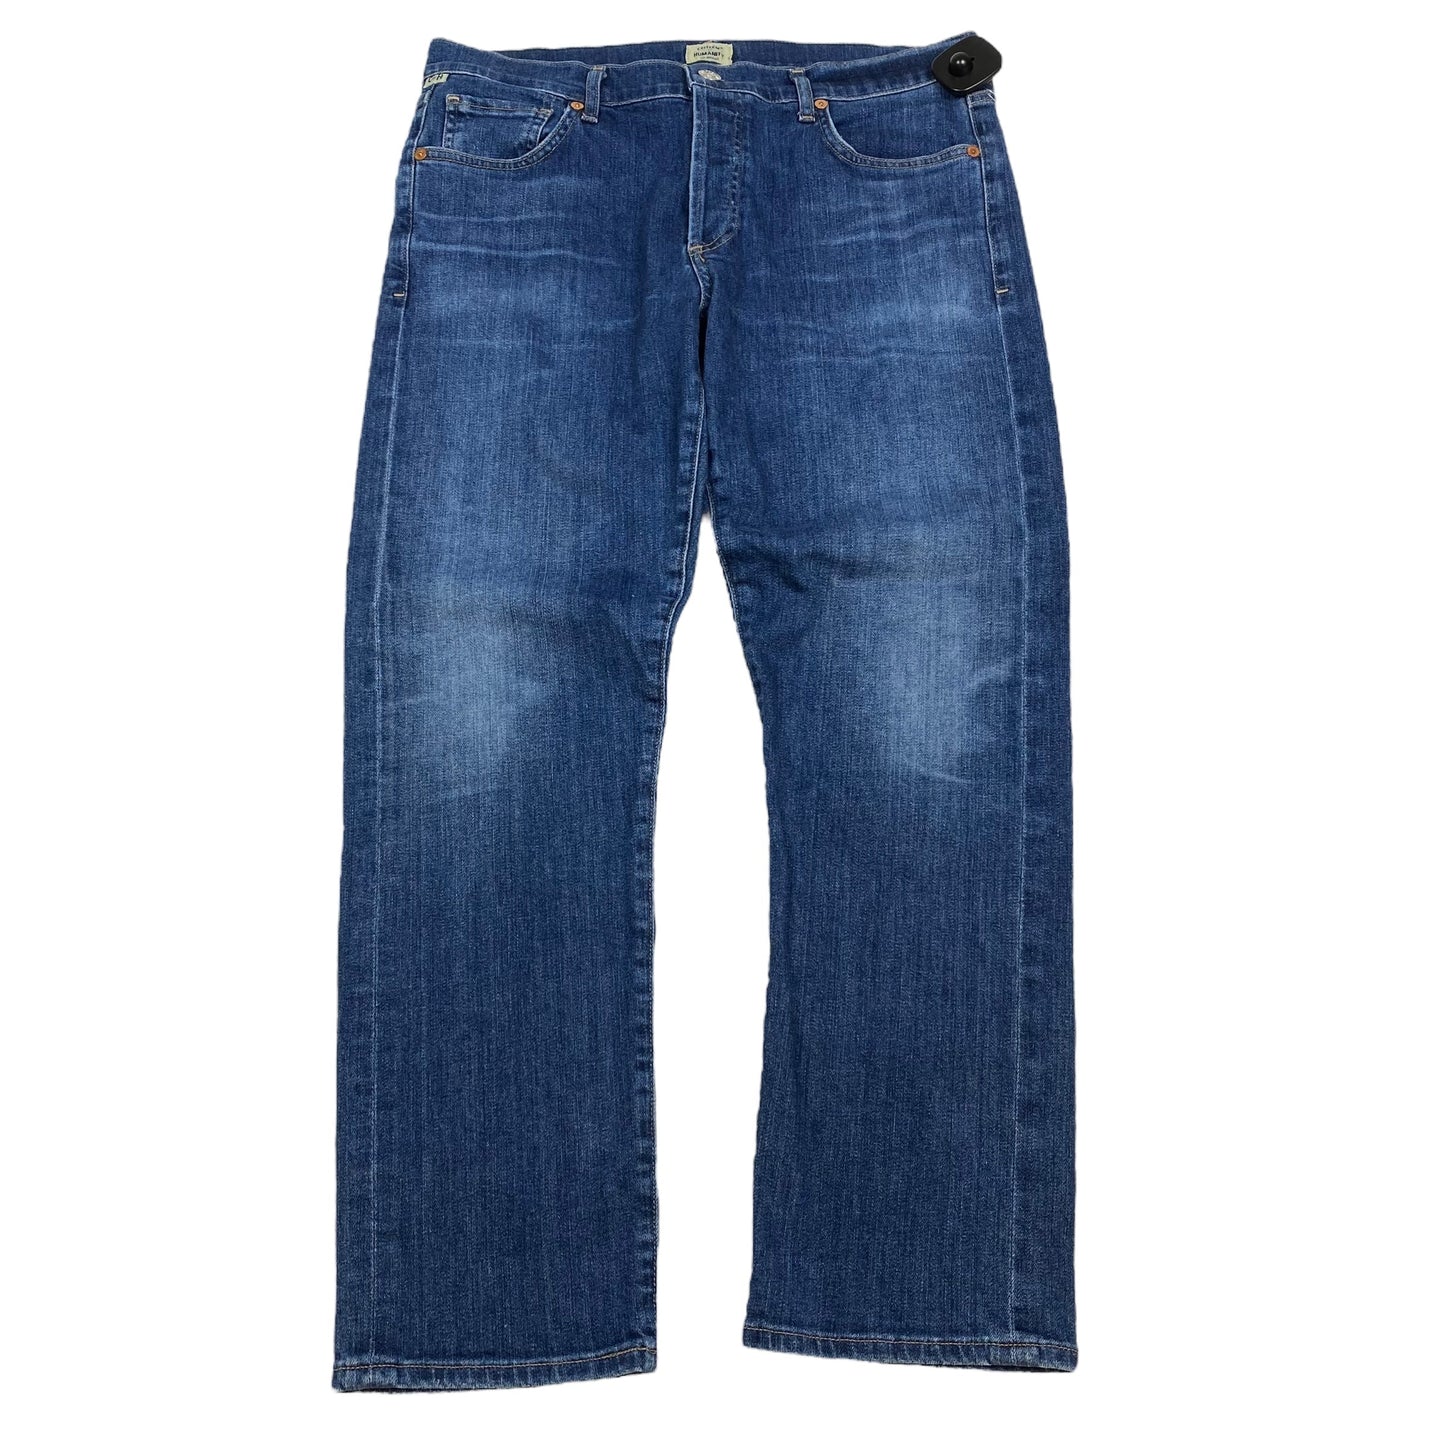 Jeans Boyfriend By Citizens Of Humanity  Size: 6